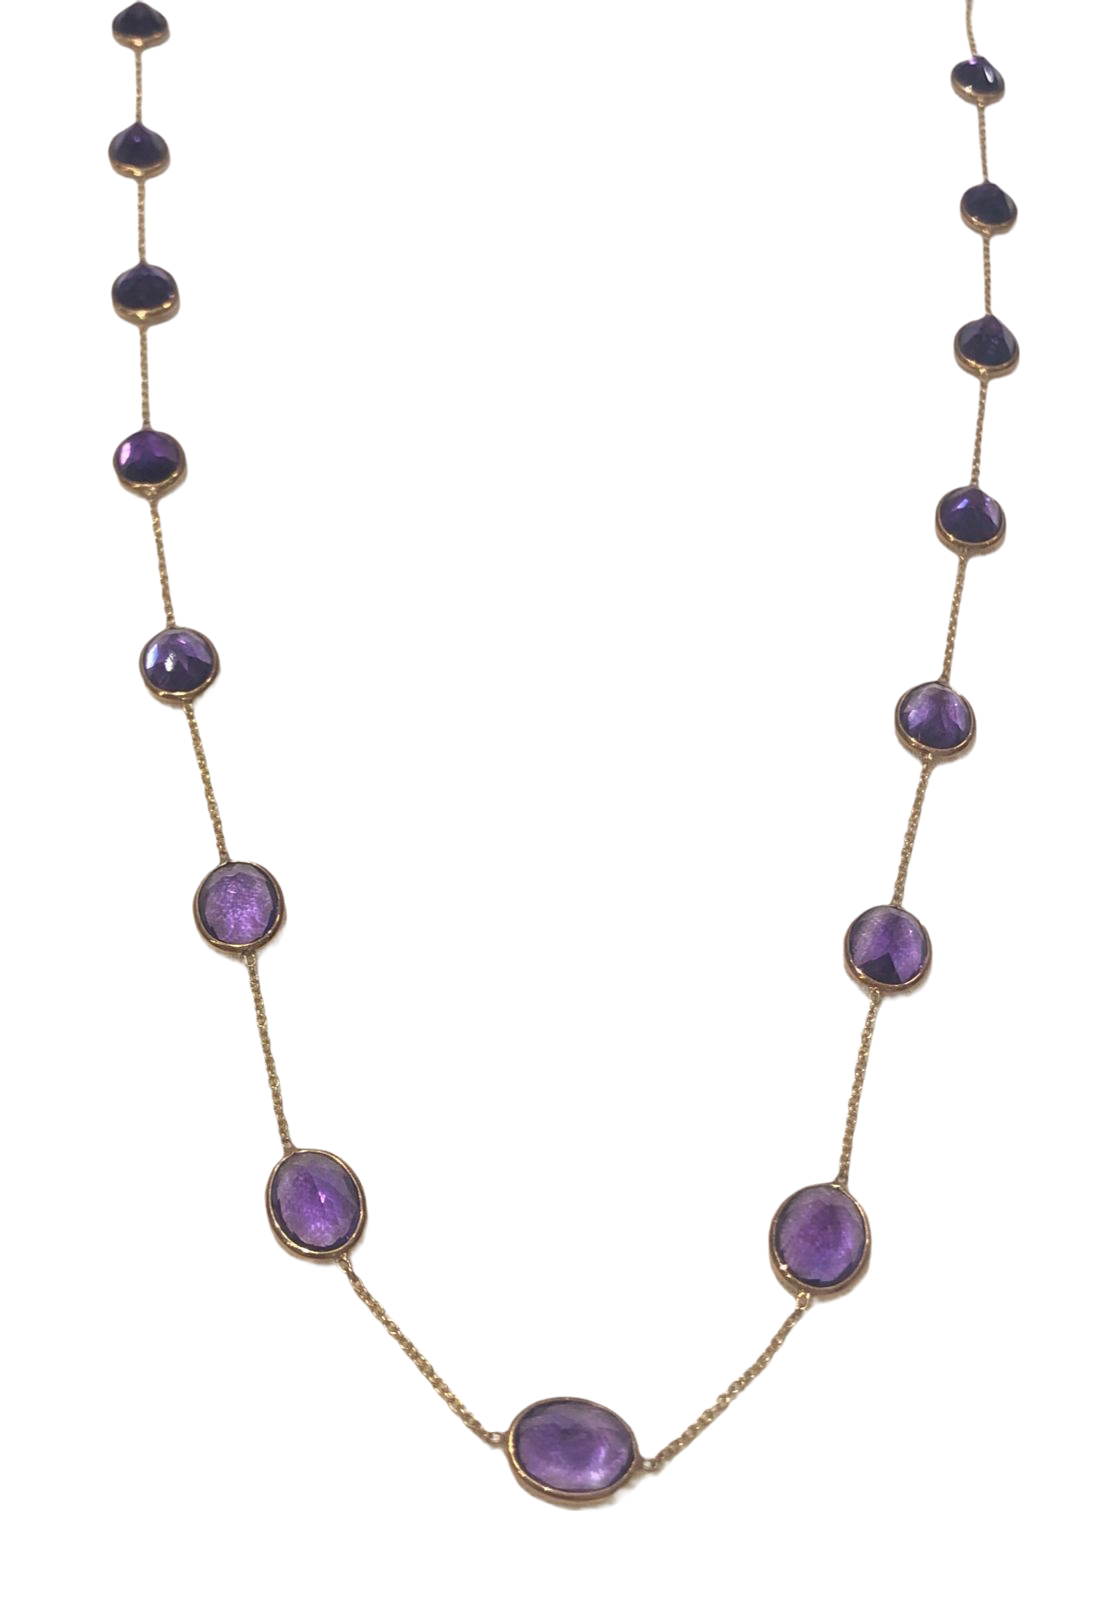 Shop Floral Paradise 18K Gold Natural Gemstone Chain for Women | Gehna